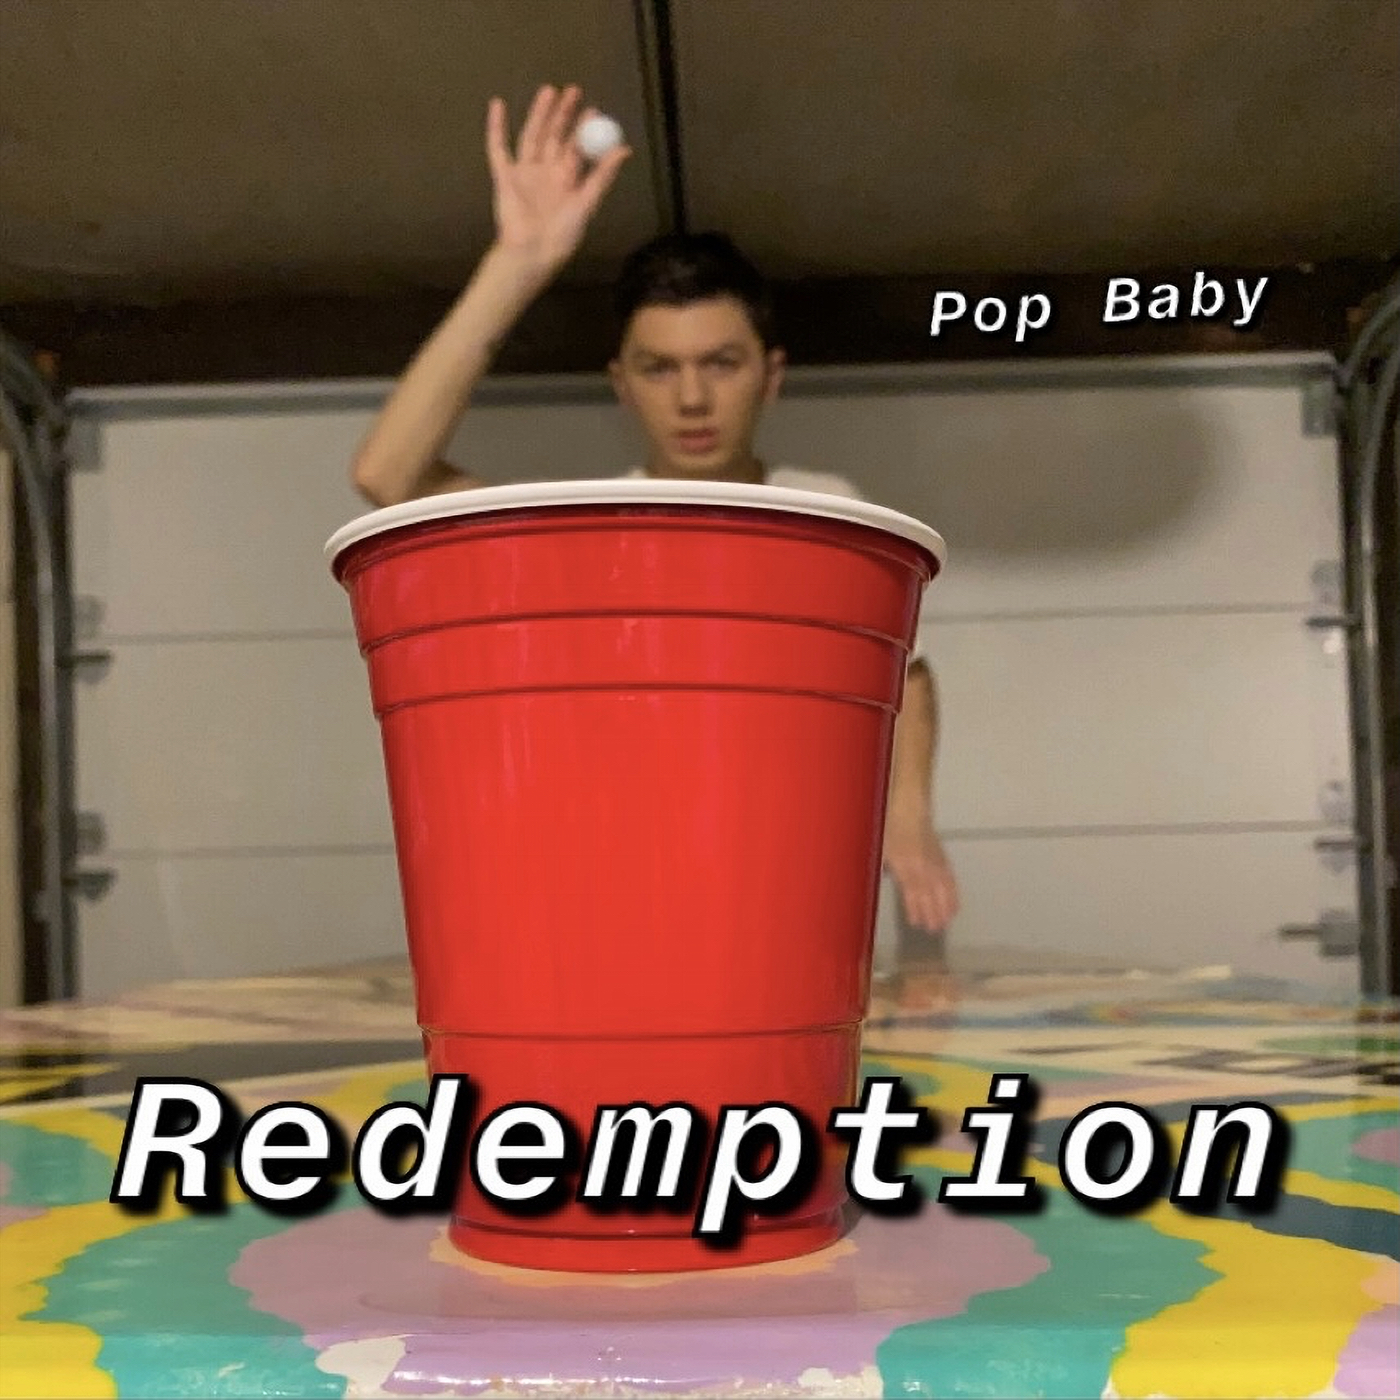 The hot new album ‘Redemption’ from ‘Pop Baby’ is about coming out of a dark place in your life.